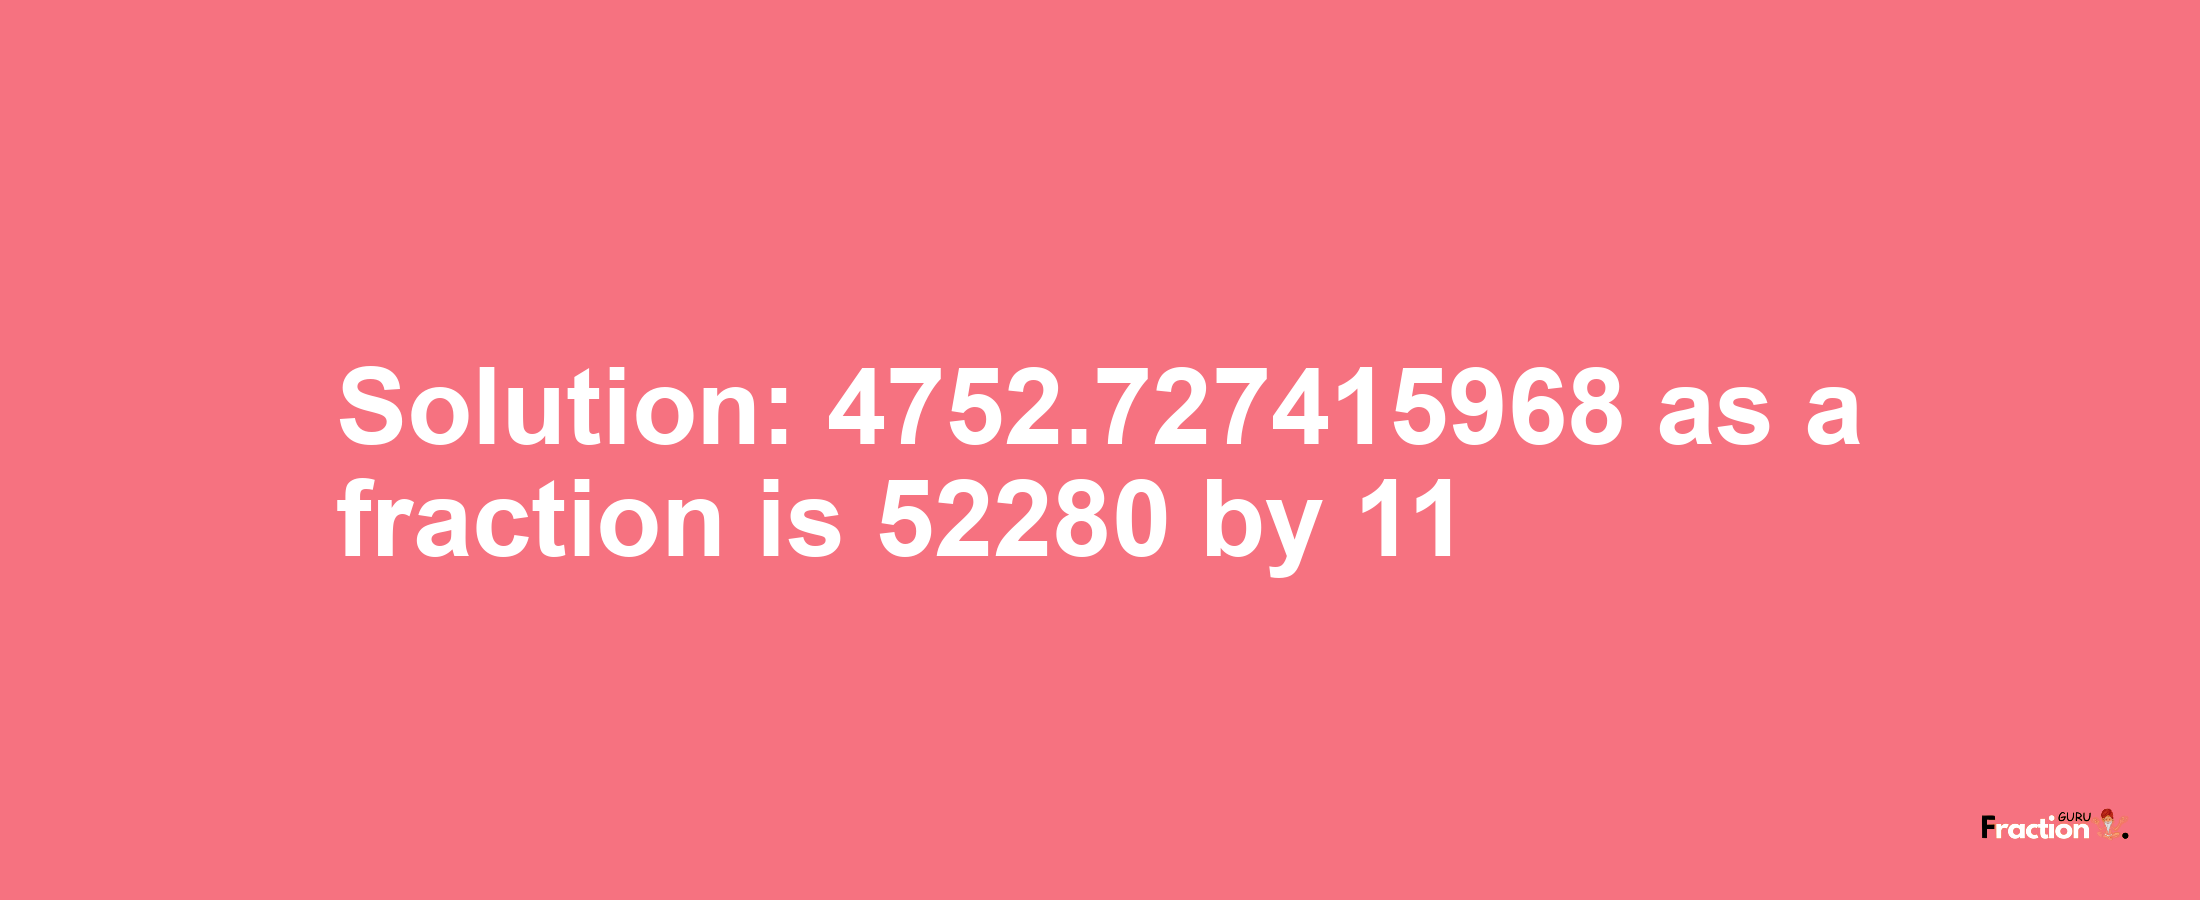 Solution:4752.727415968 as a fraction is 52280/11